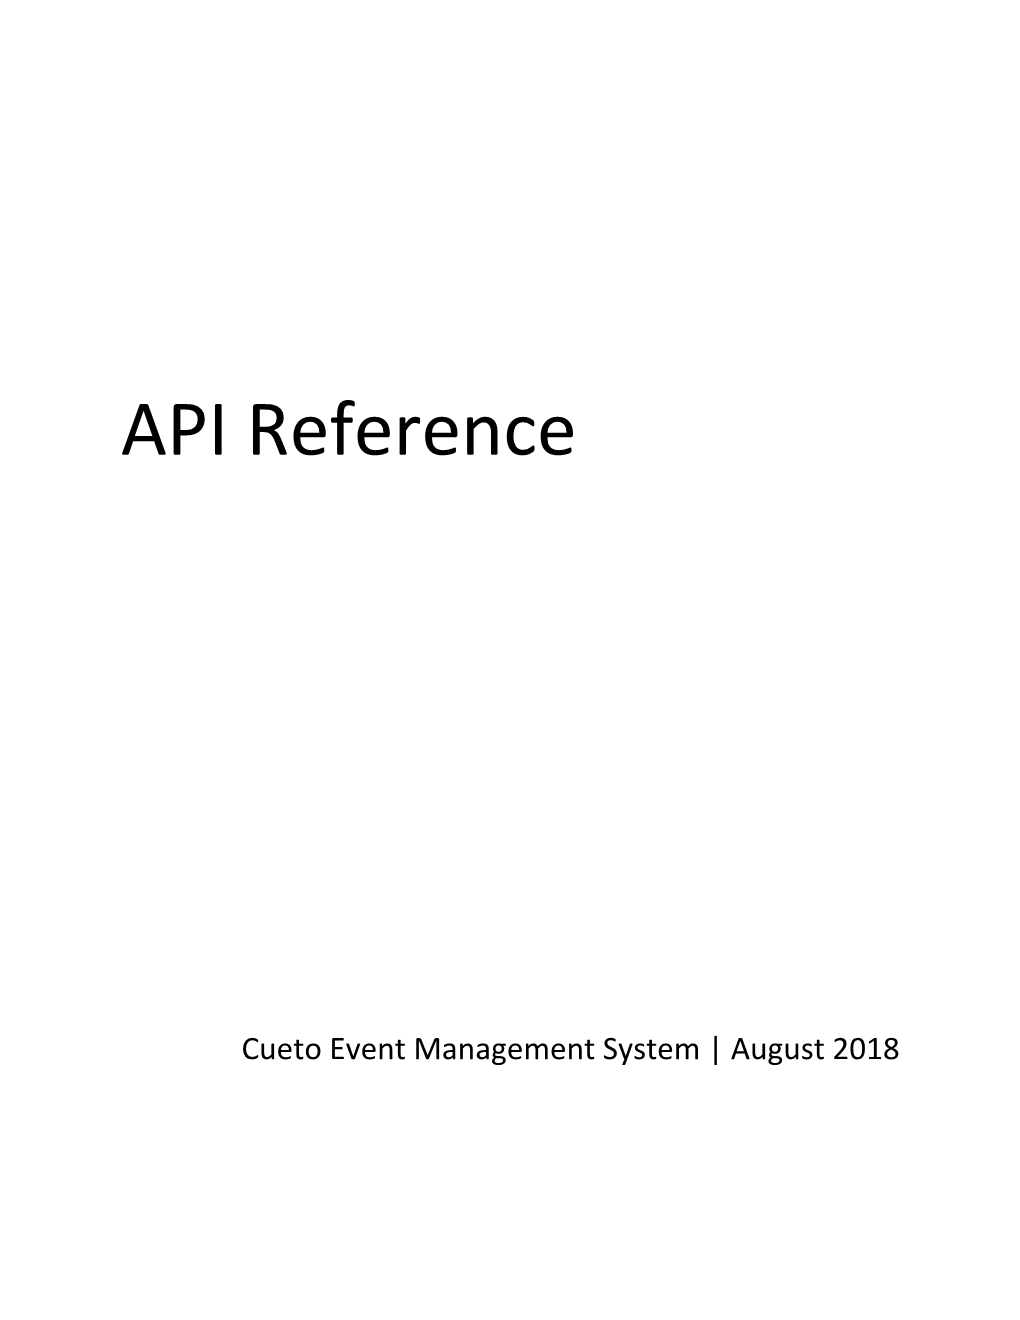 Cueto Event Management System August 2018